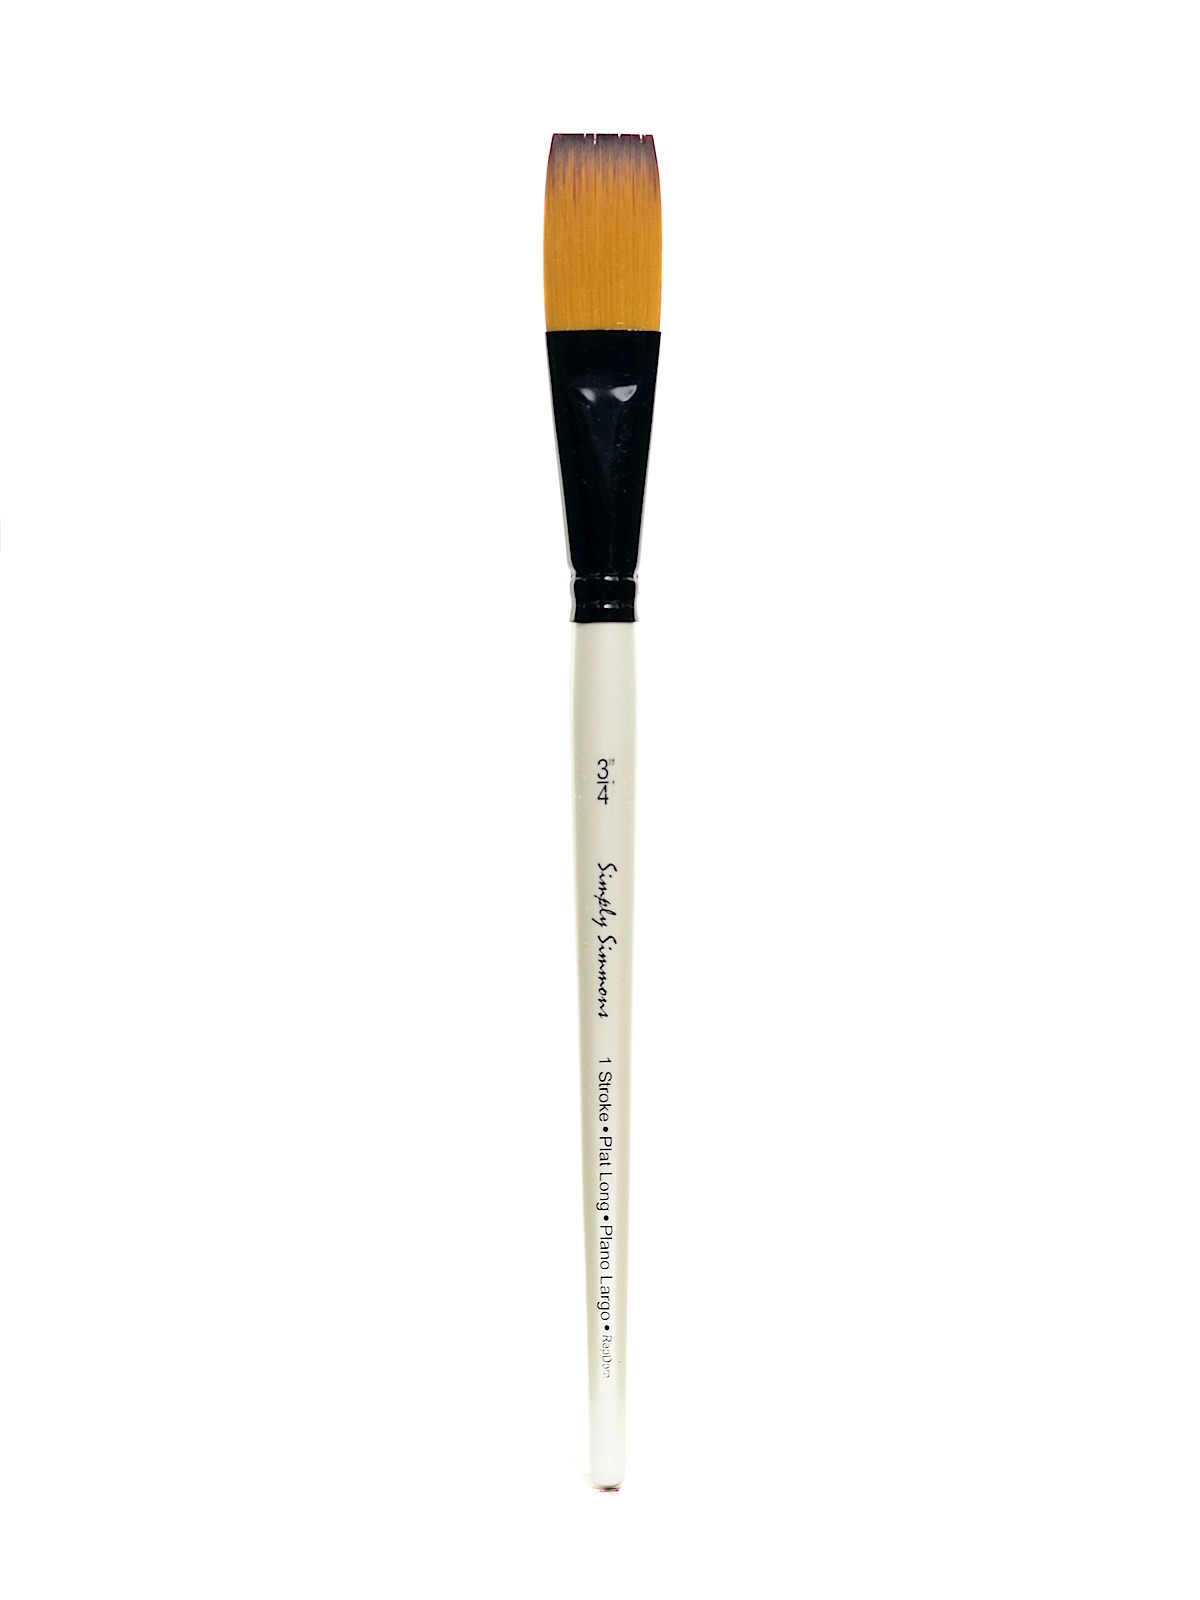 Simply Simmons Short Handle Brushes One Stroke 3 4 In.